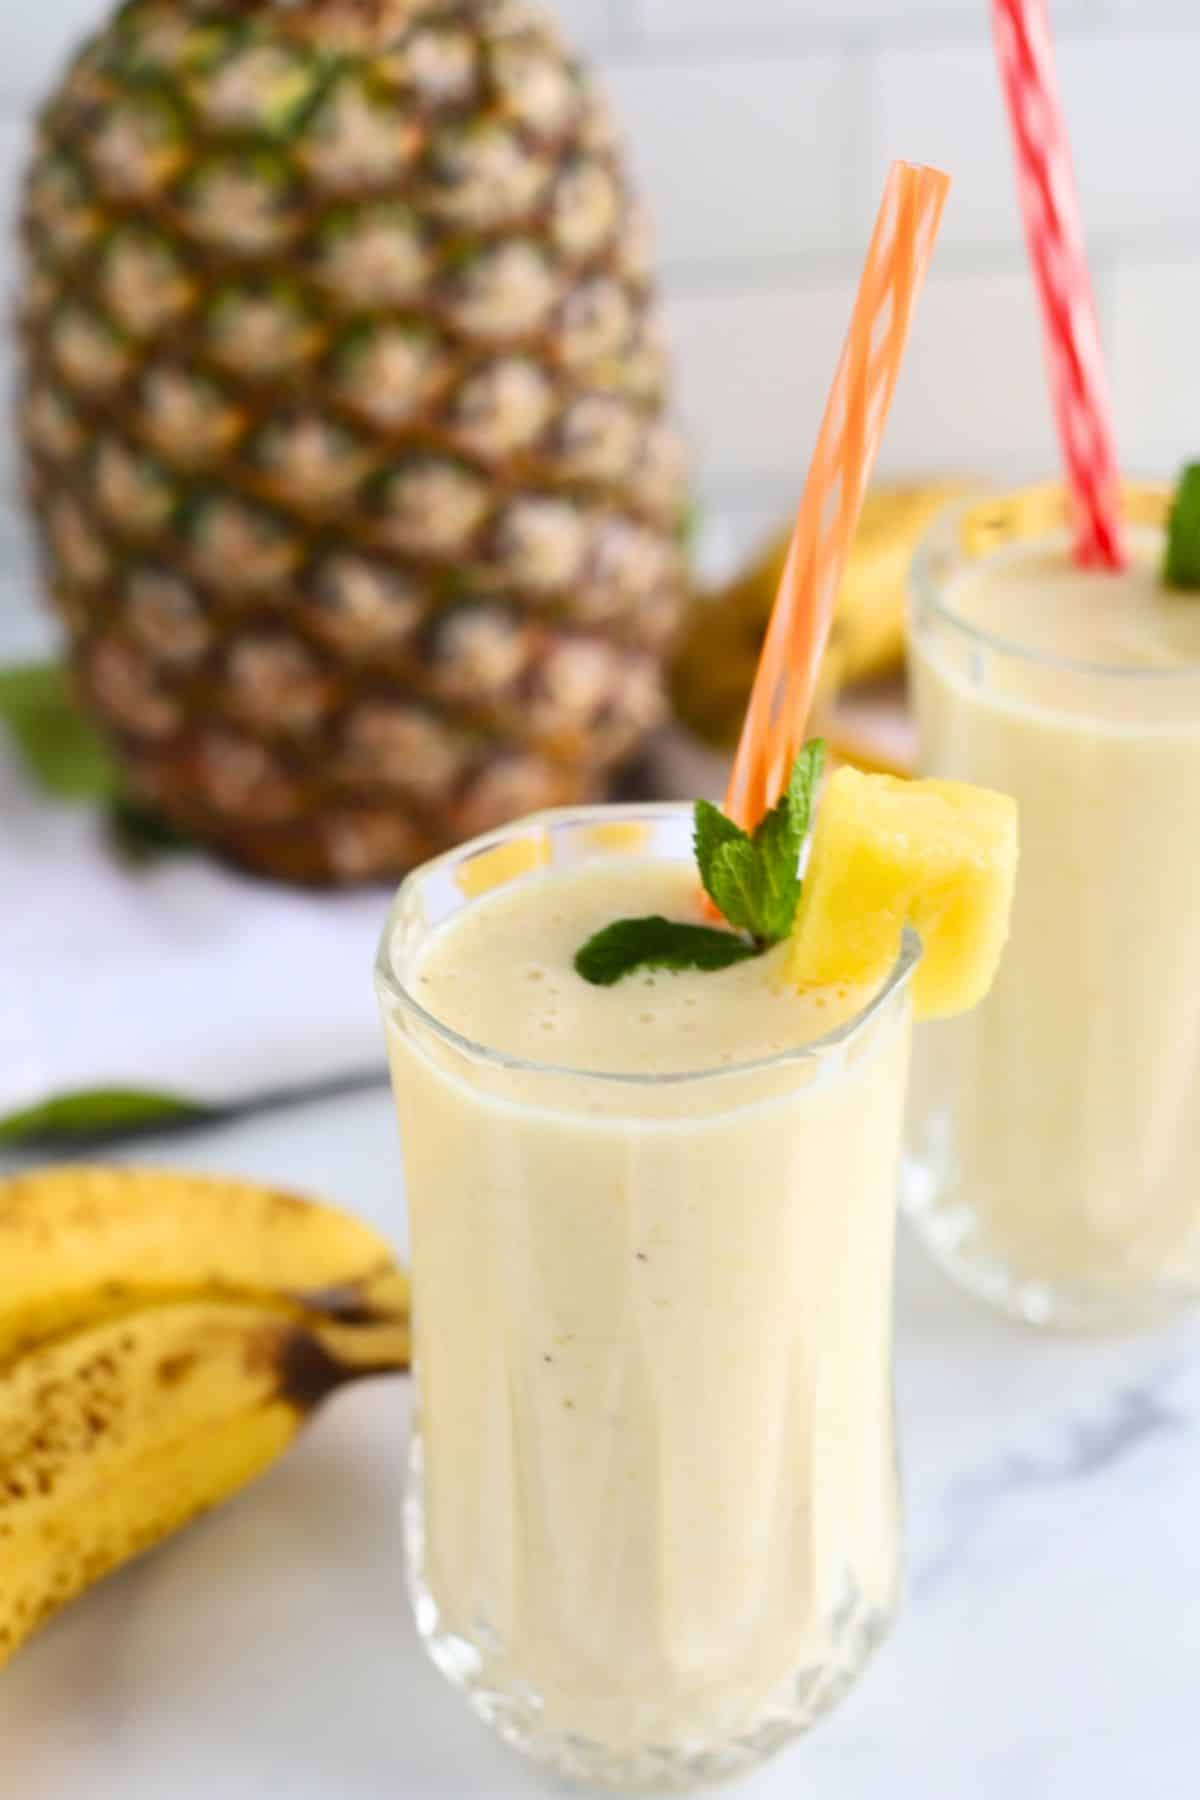 Glasses of banana pineapple smoothie with pineapple and bananas at the back.